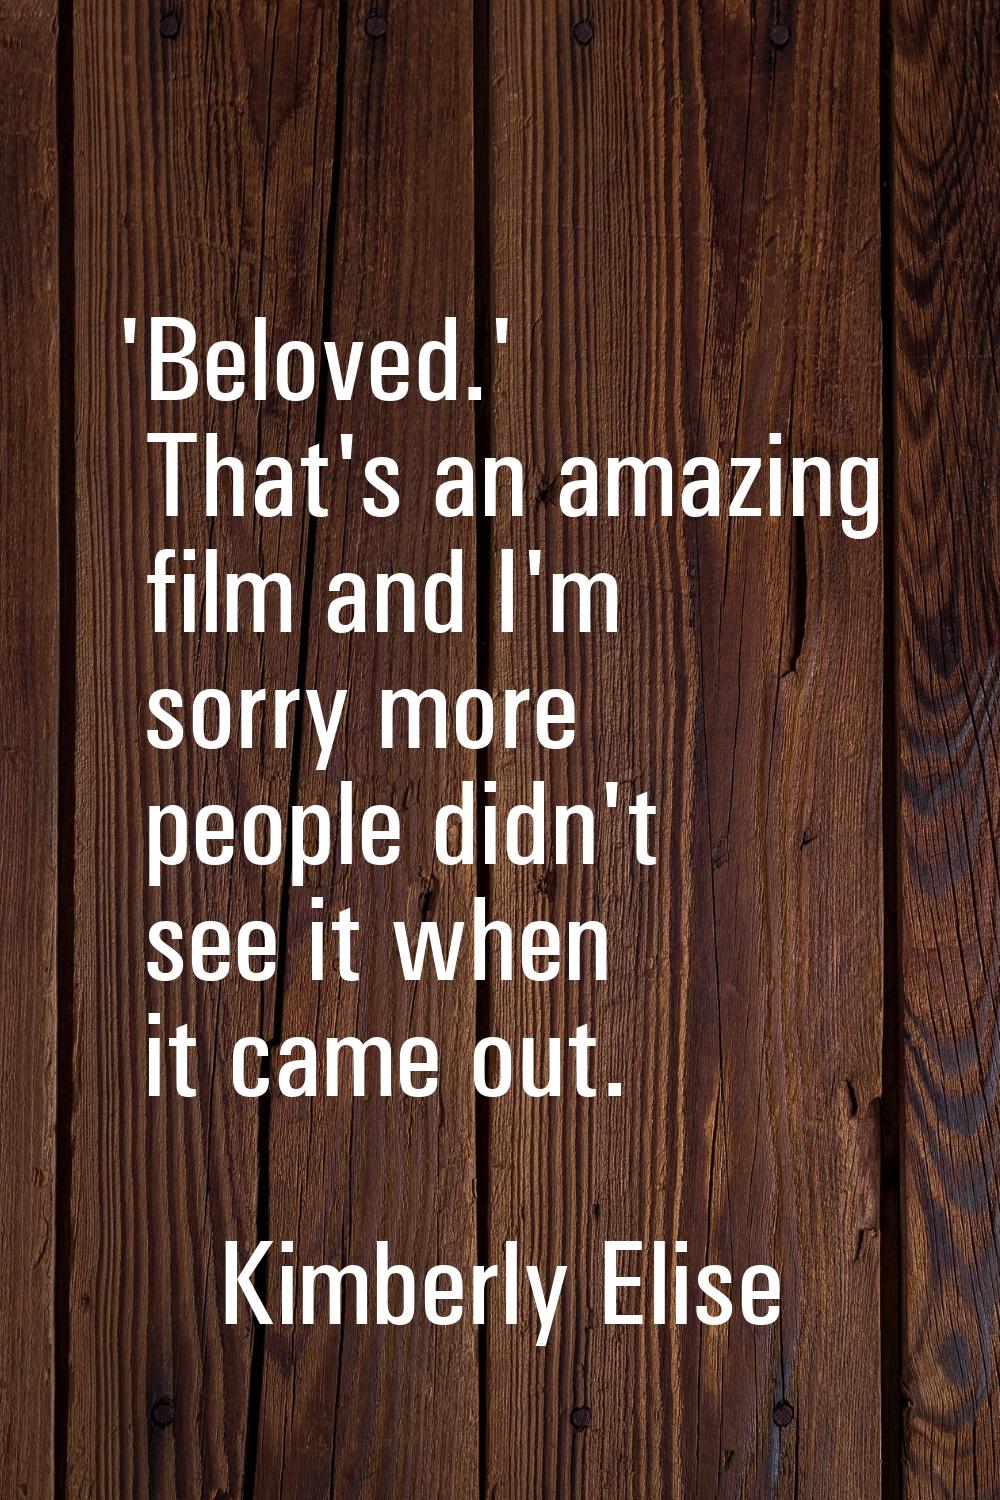 'Beloved.' That's an amazing film and I'm sorry more people didn't see it when it came out.